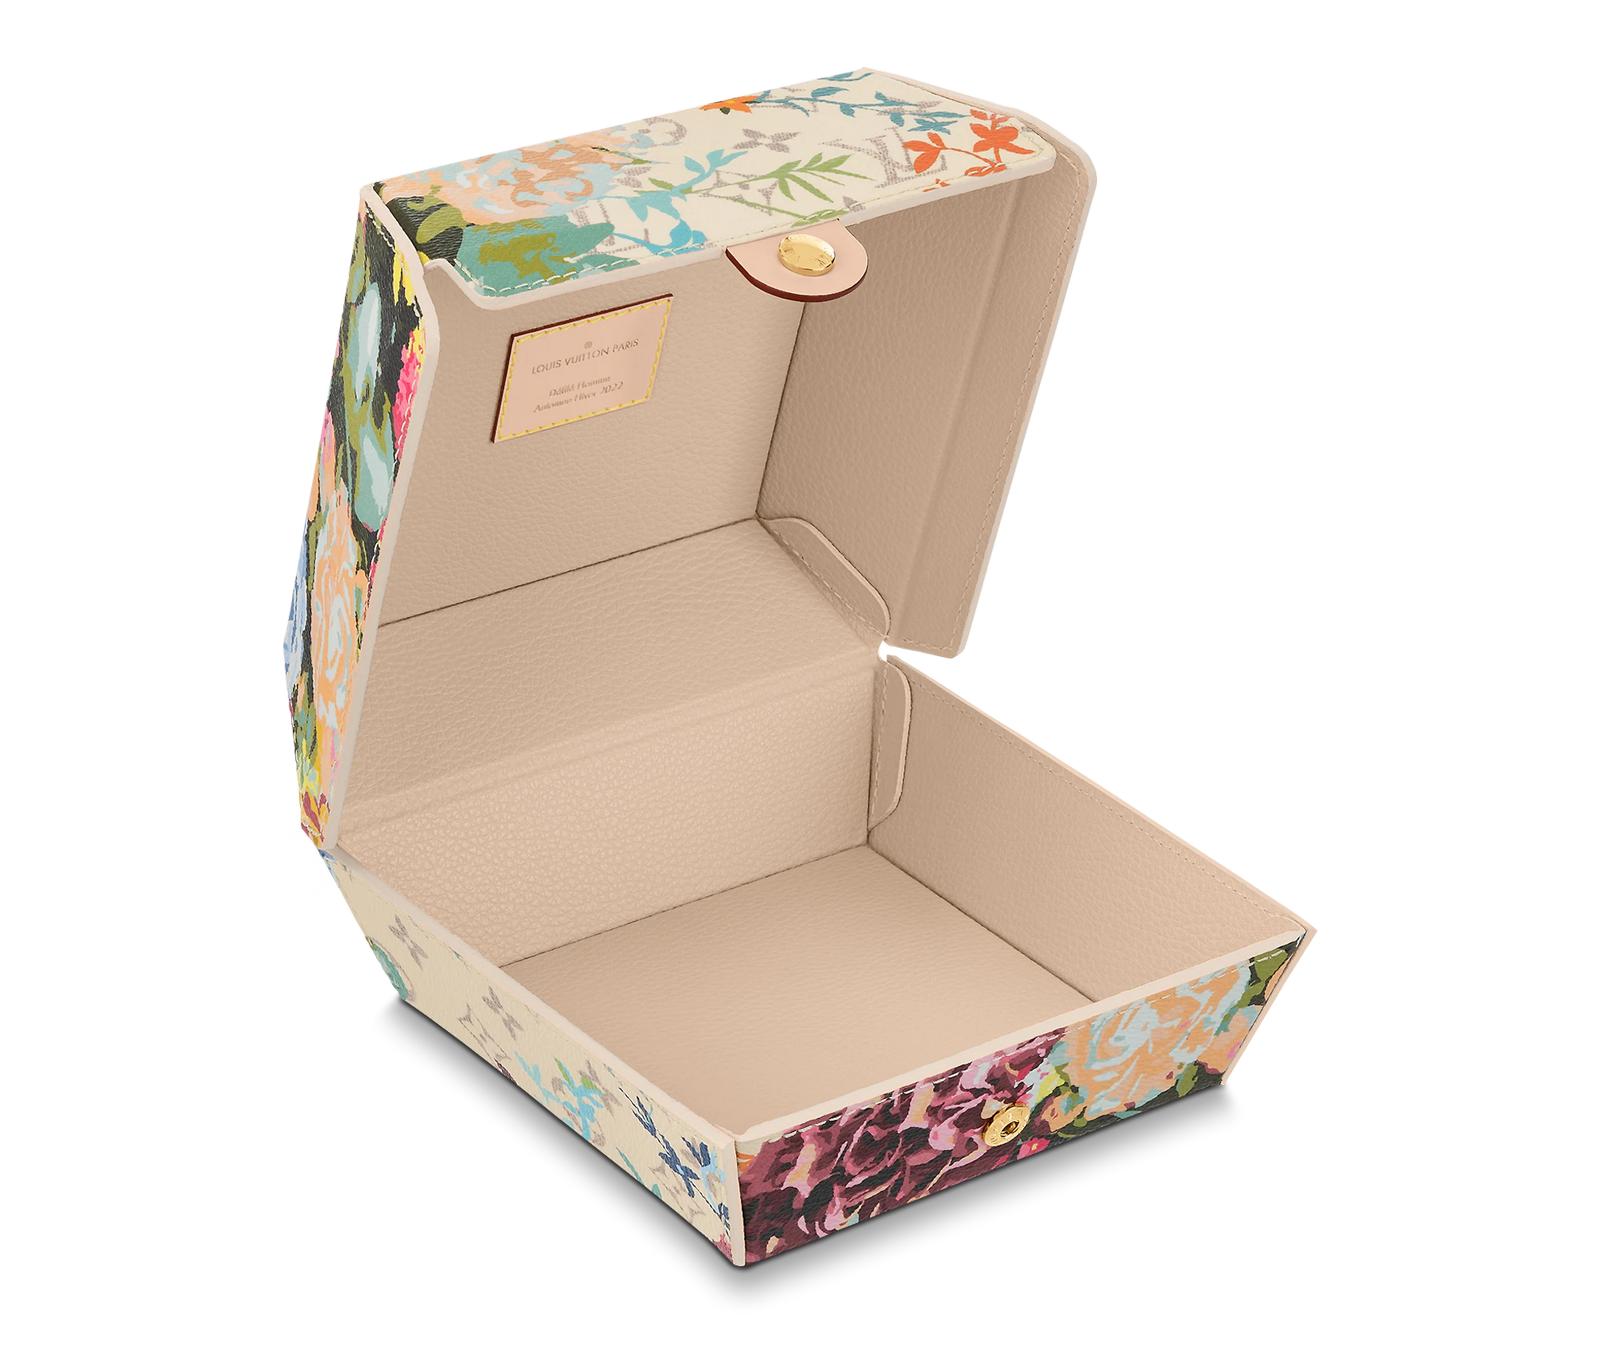 Elevate Your Dining Experience with the Luxurious Louis Vuitton Floral Burger Box Coaster Set